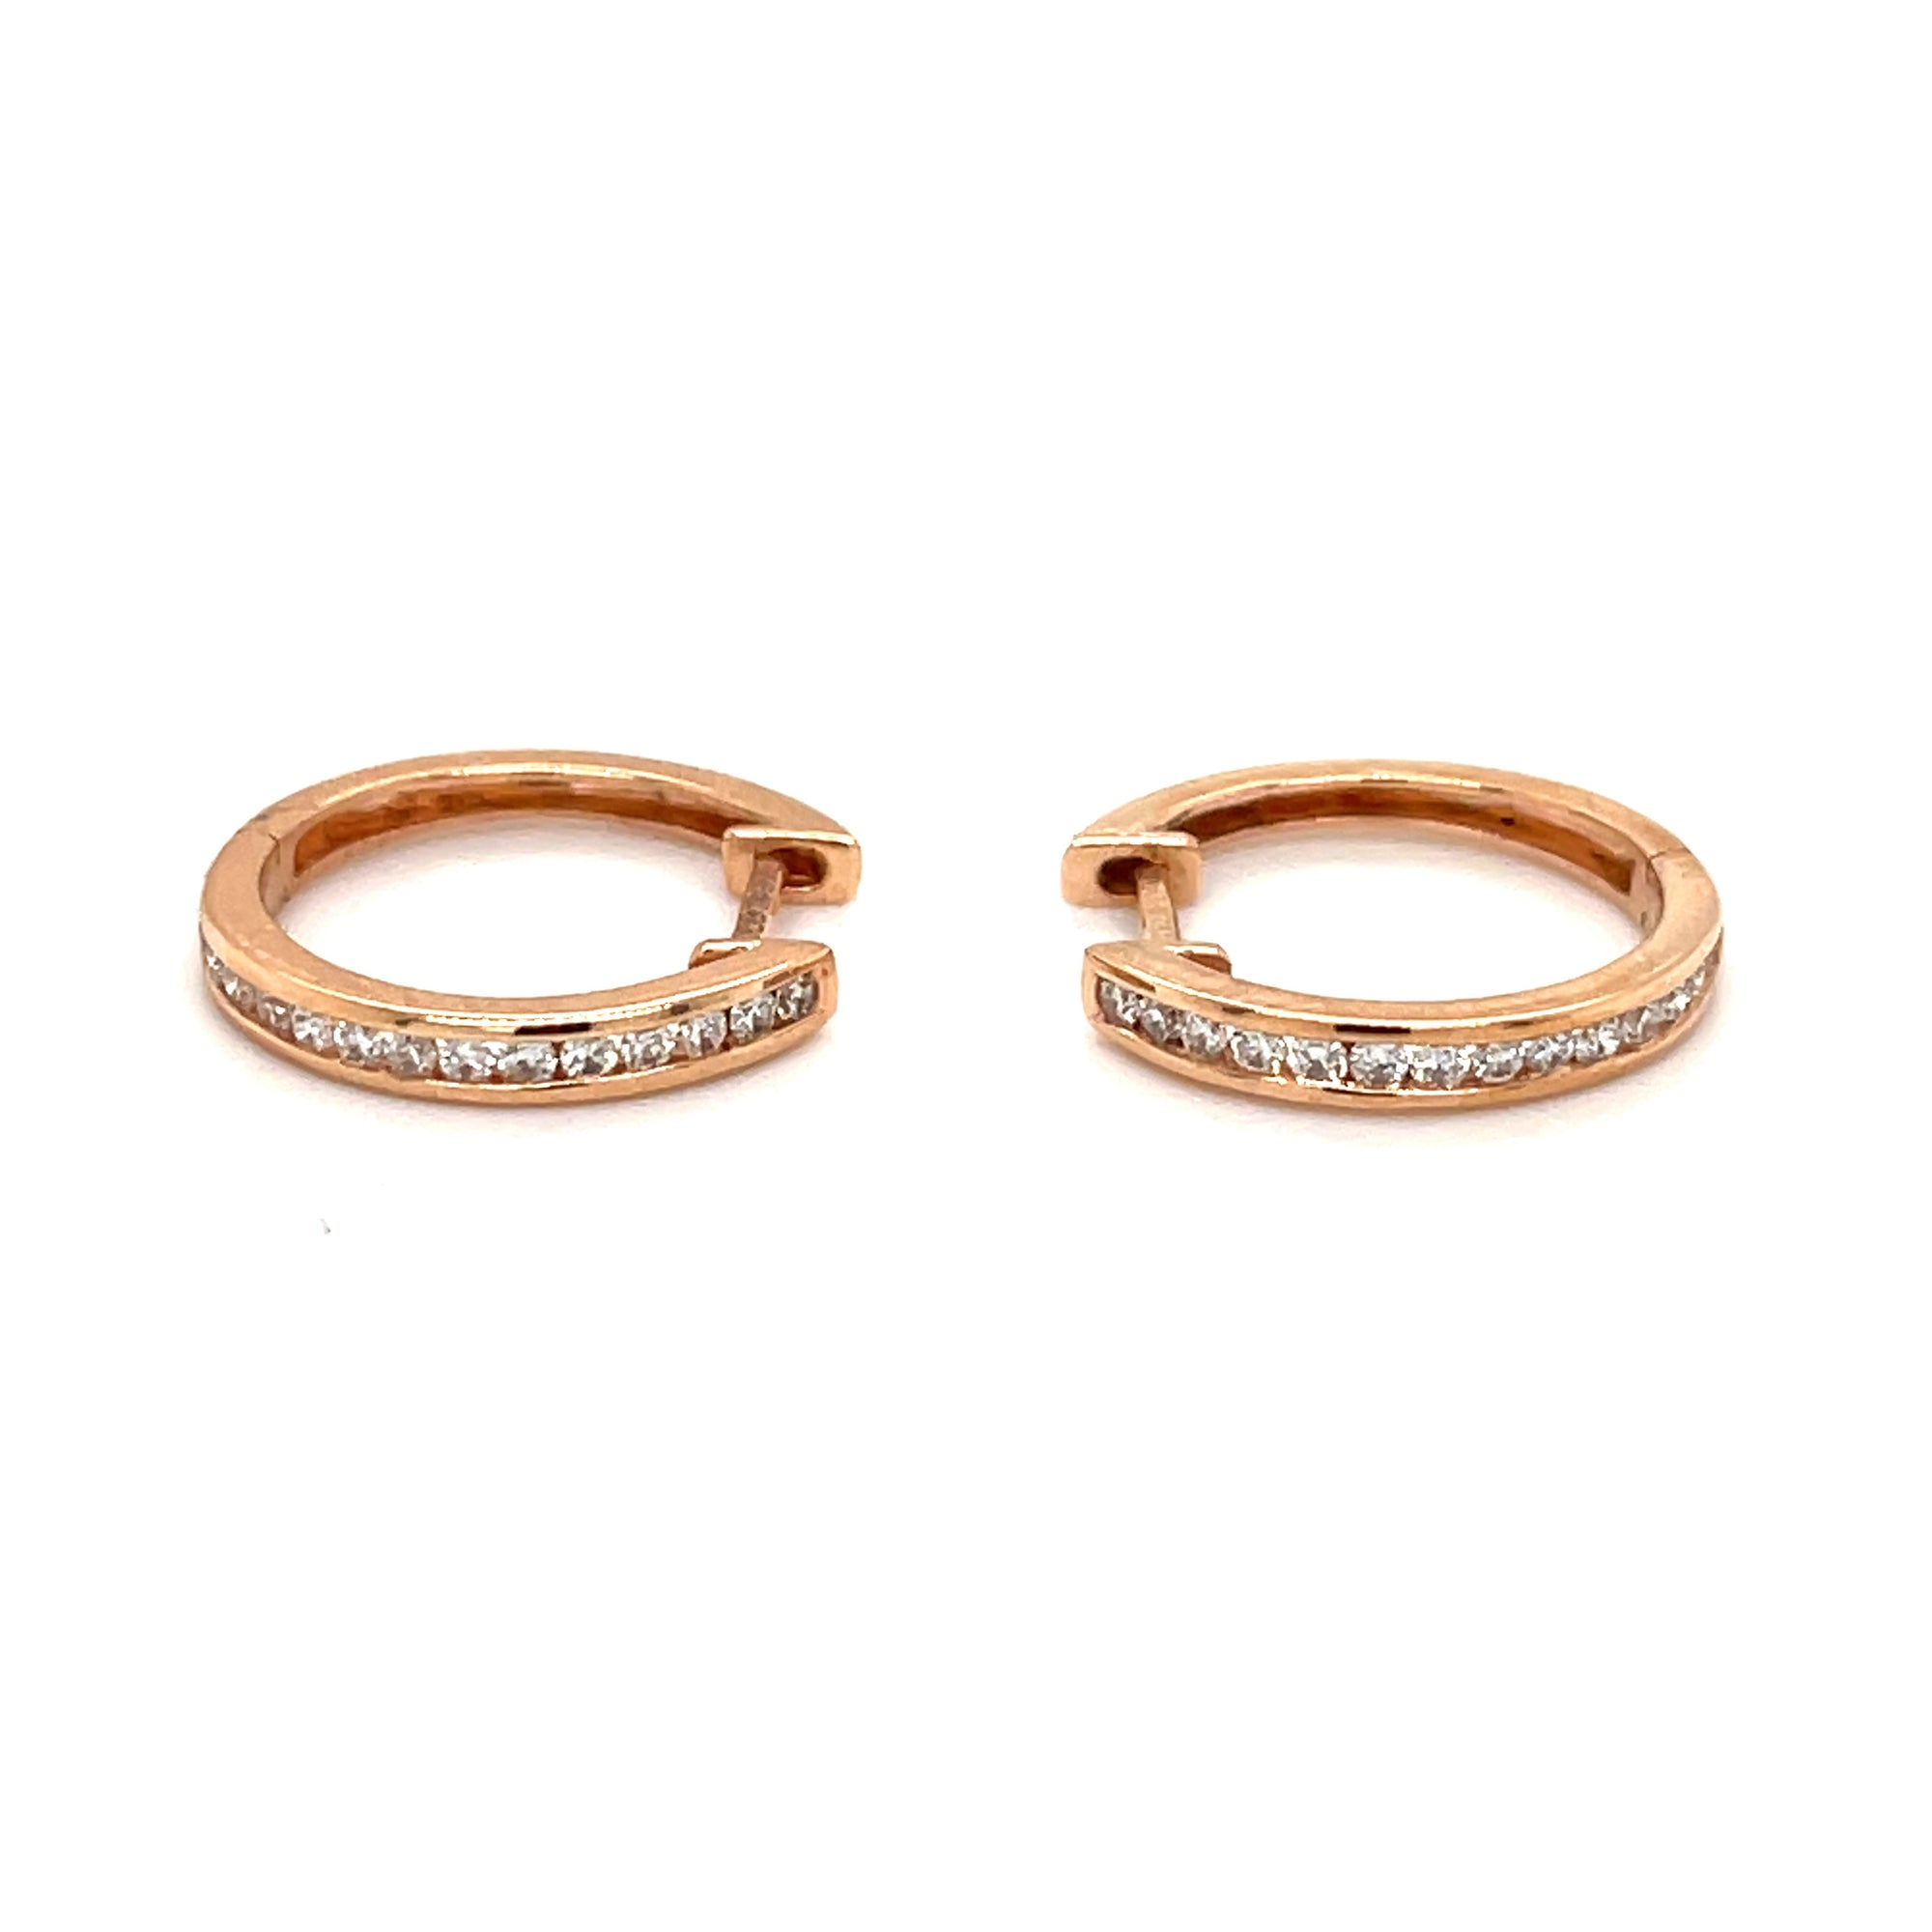 0.28ct diamond hoop earrings set in 18kt rose gold, H/I colour, SI clarity